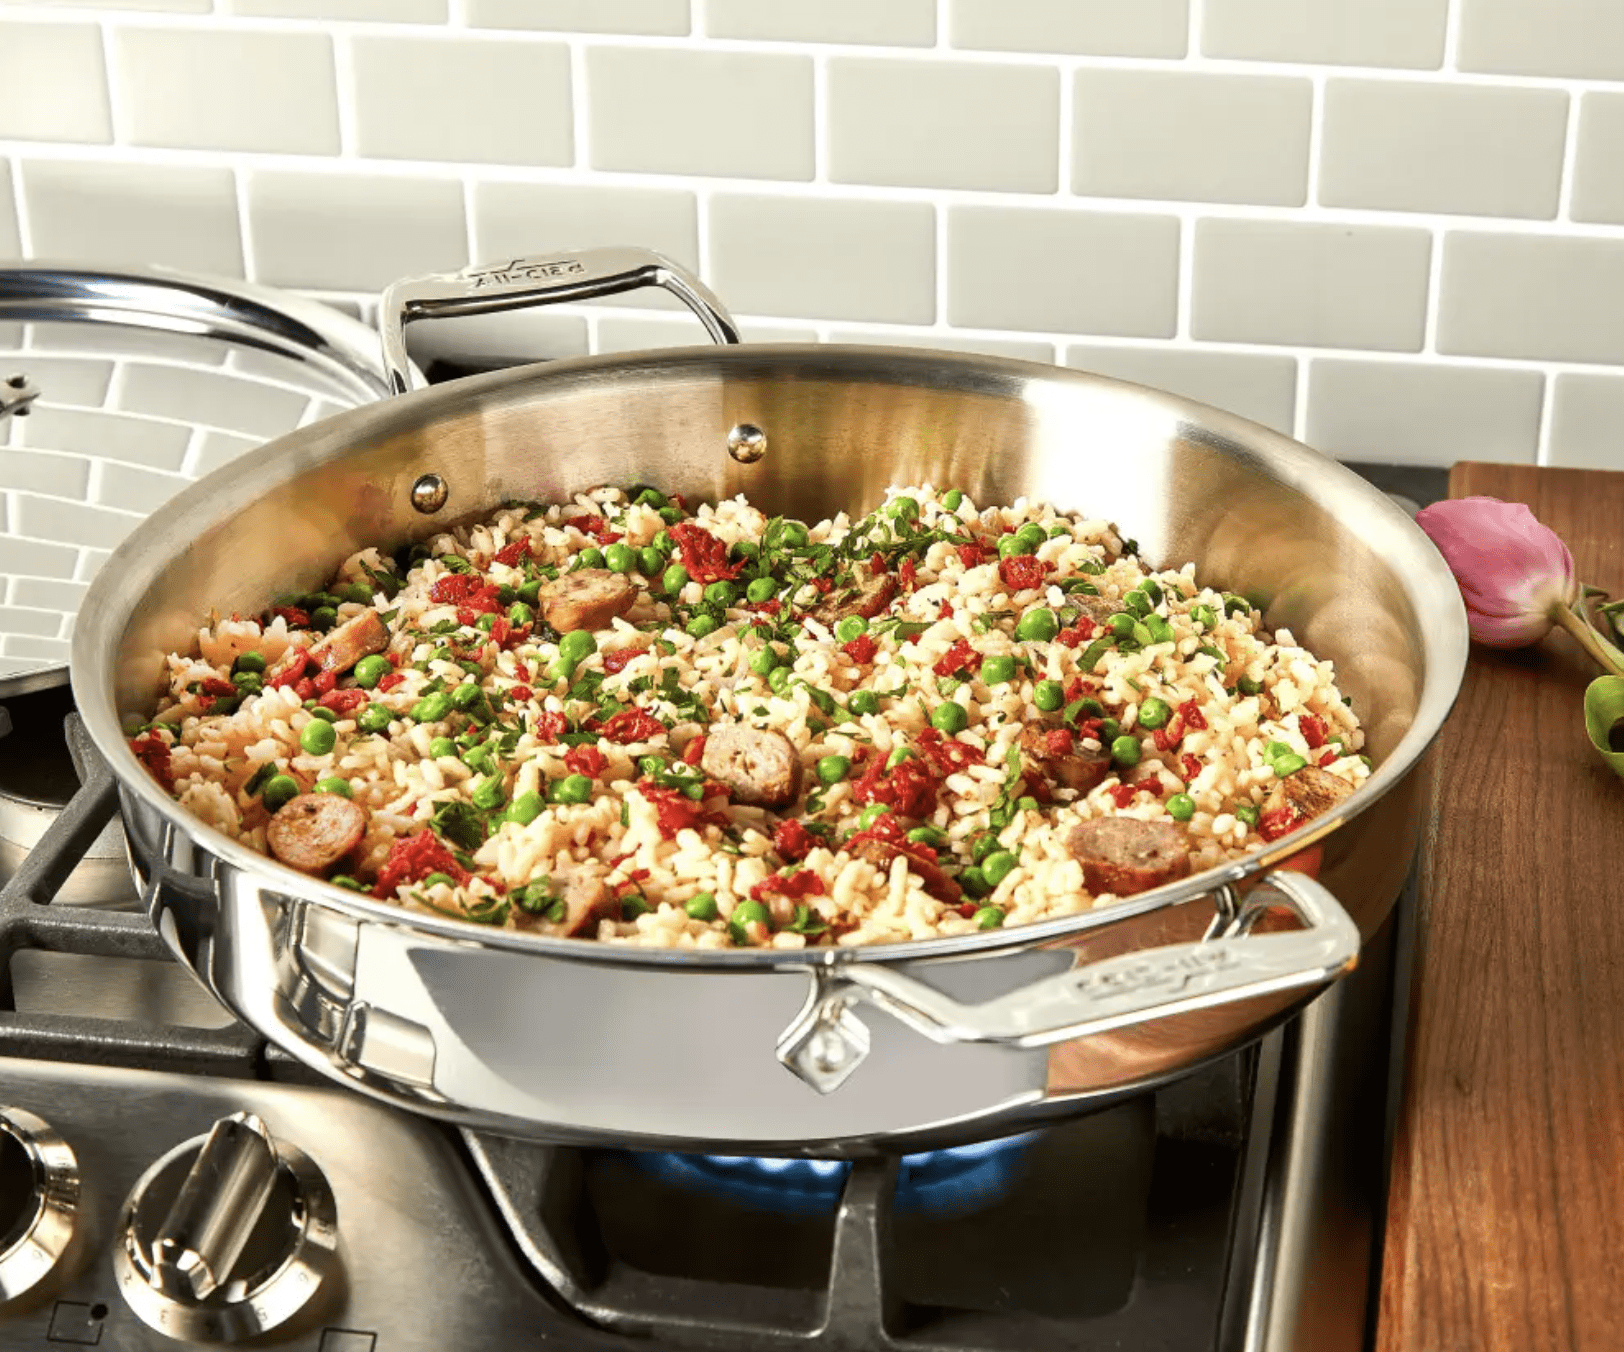 This All-Clad 10-piece cookware set is $100 off at Macy's